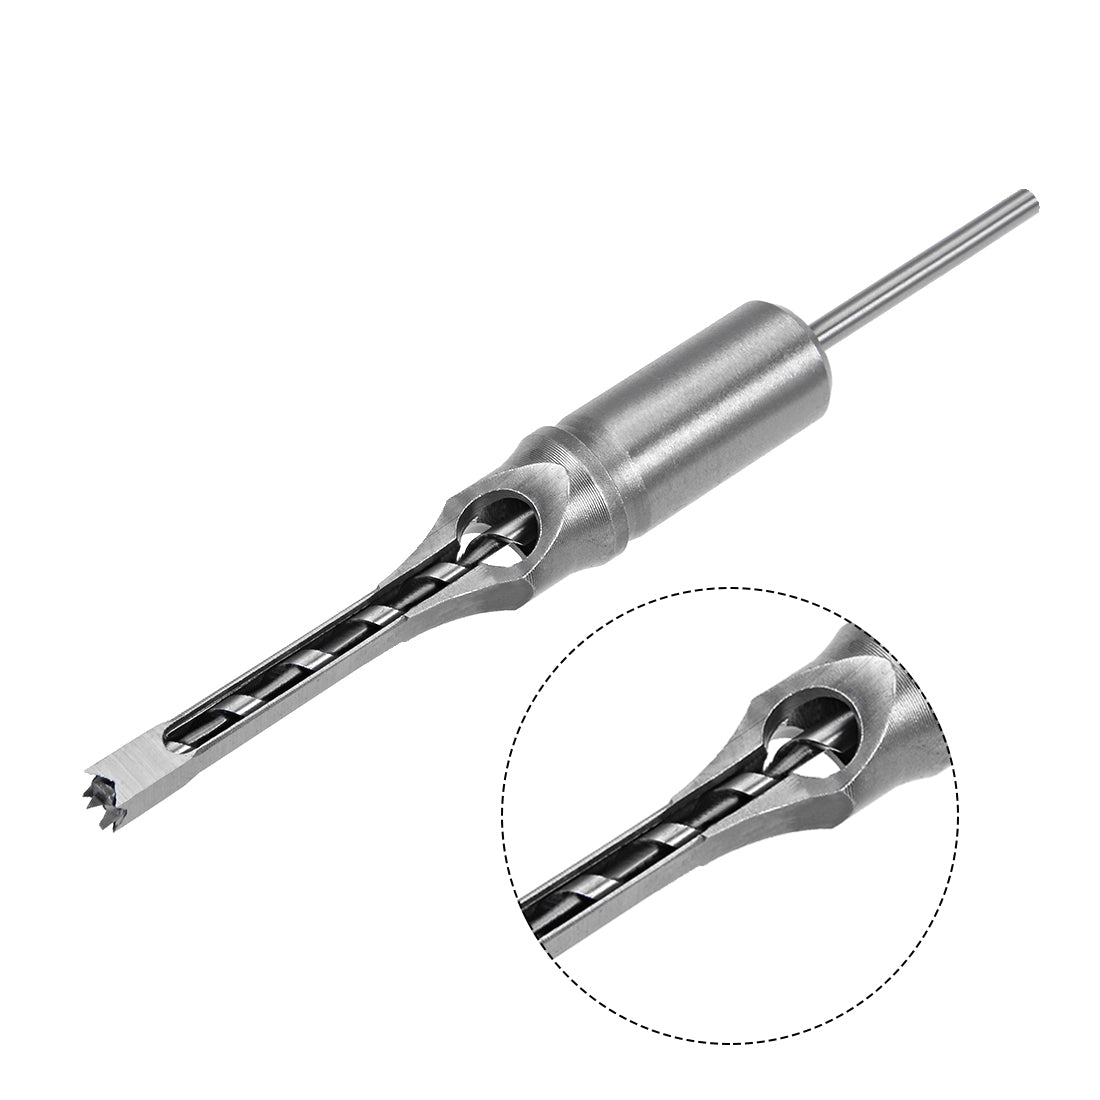 uxcell Uxcell Square Hole Drill Bit for Wood Hollow Chisel Mortiser Auger Spur Cutter Tool, High Carbon Steel for Woodworking Carpentry